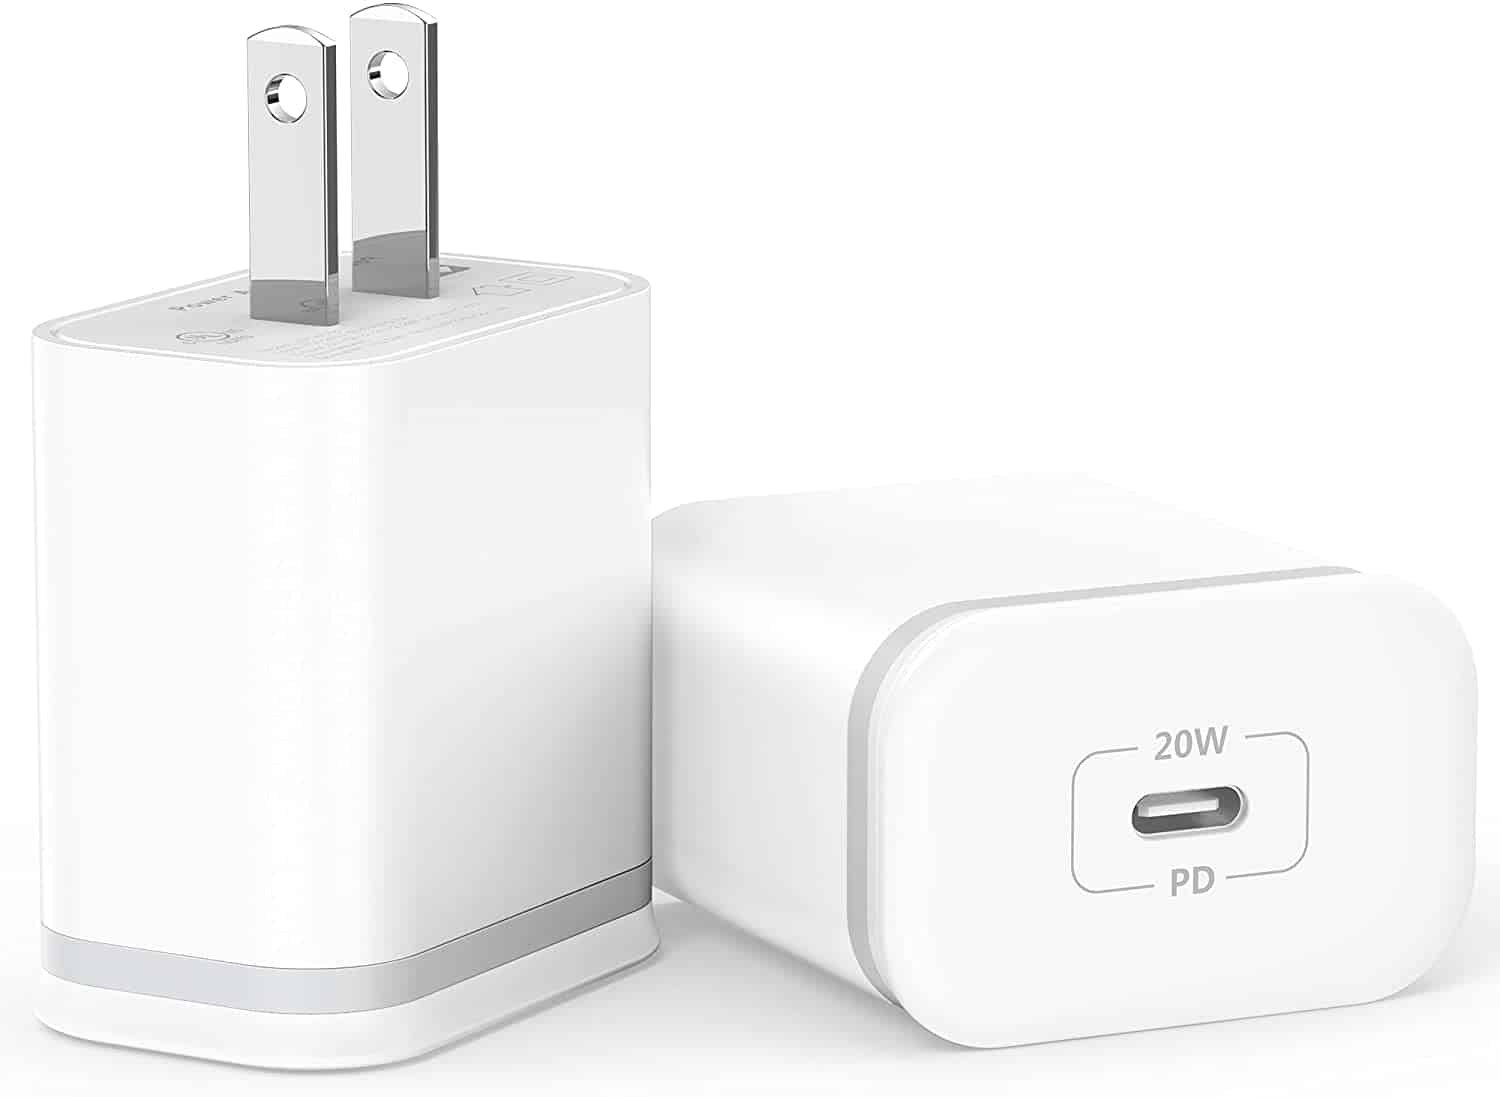 LUOATIP 3-Pack of USB Wall Charger